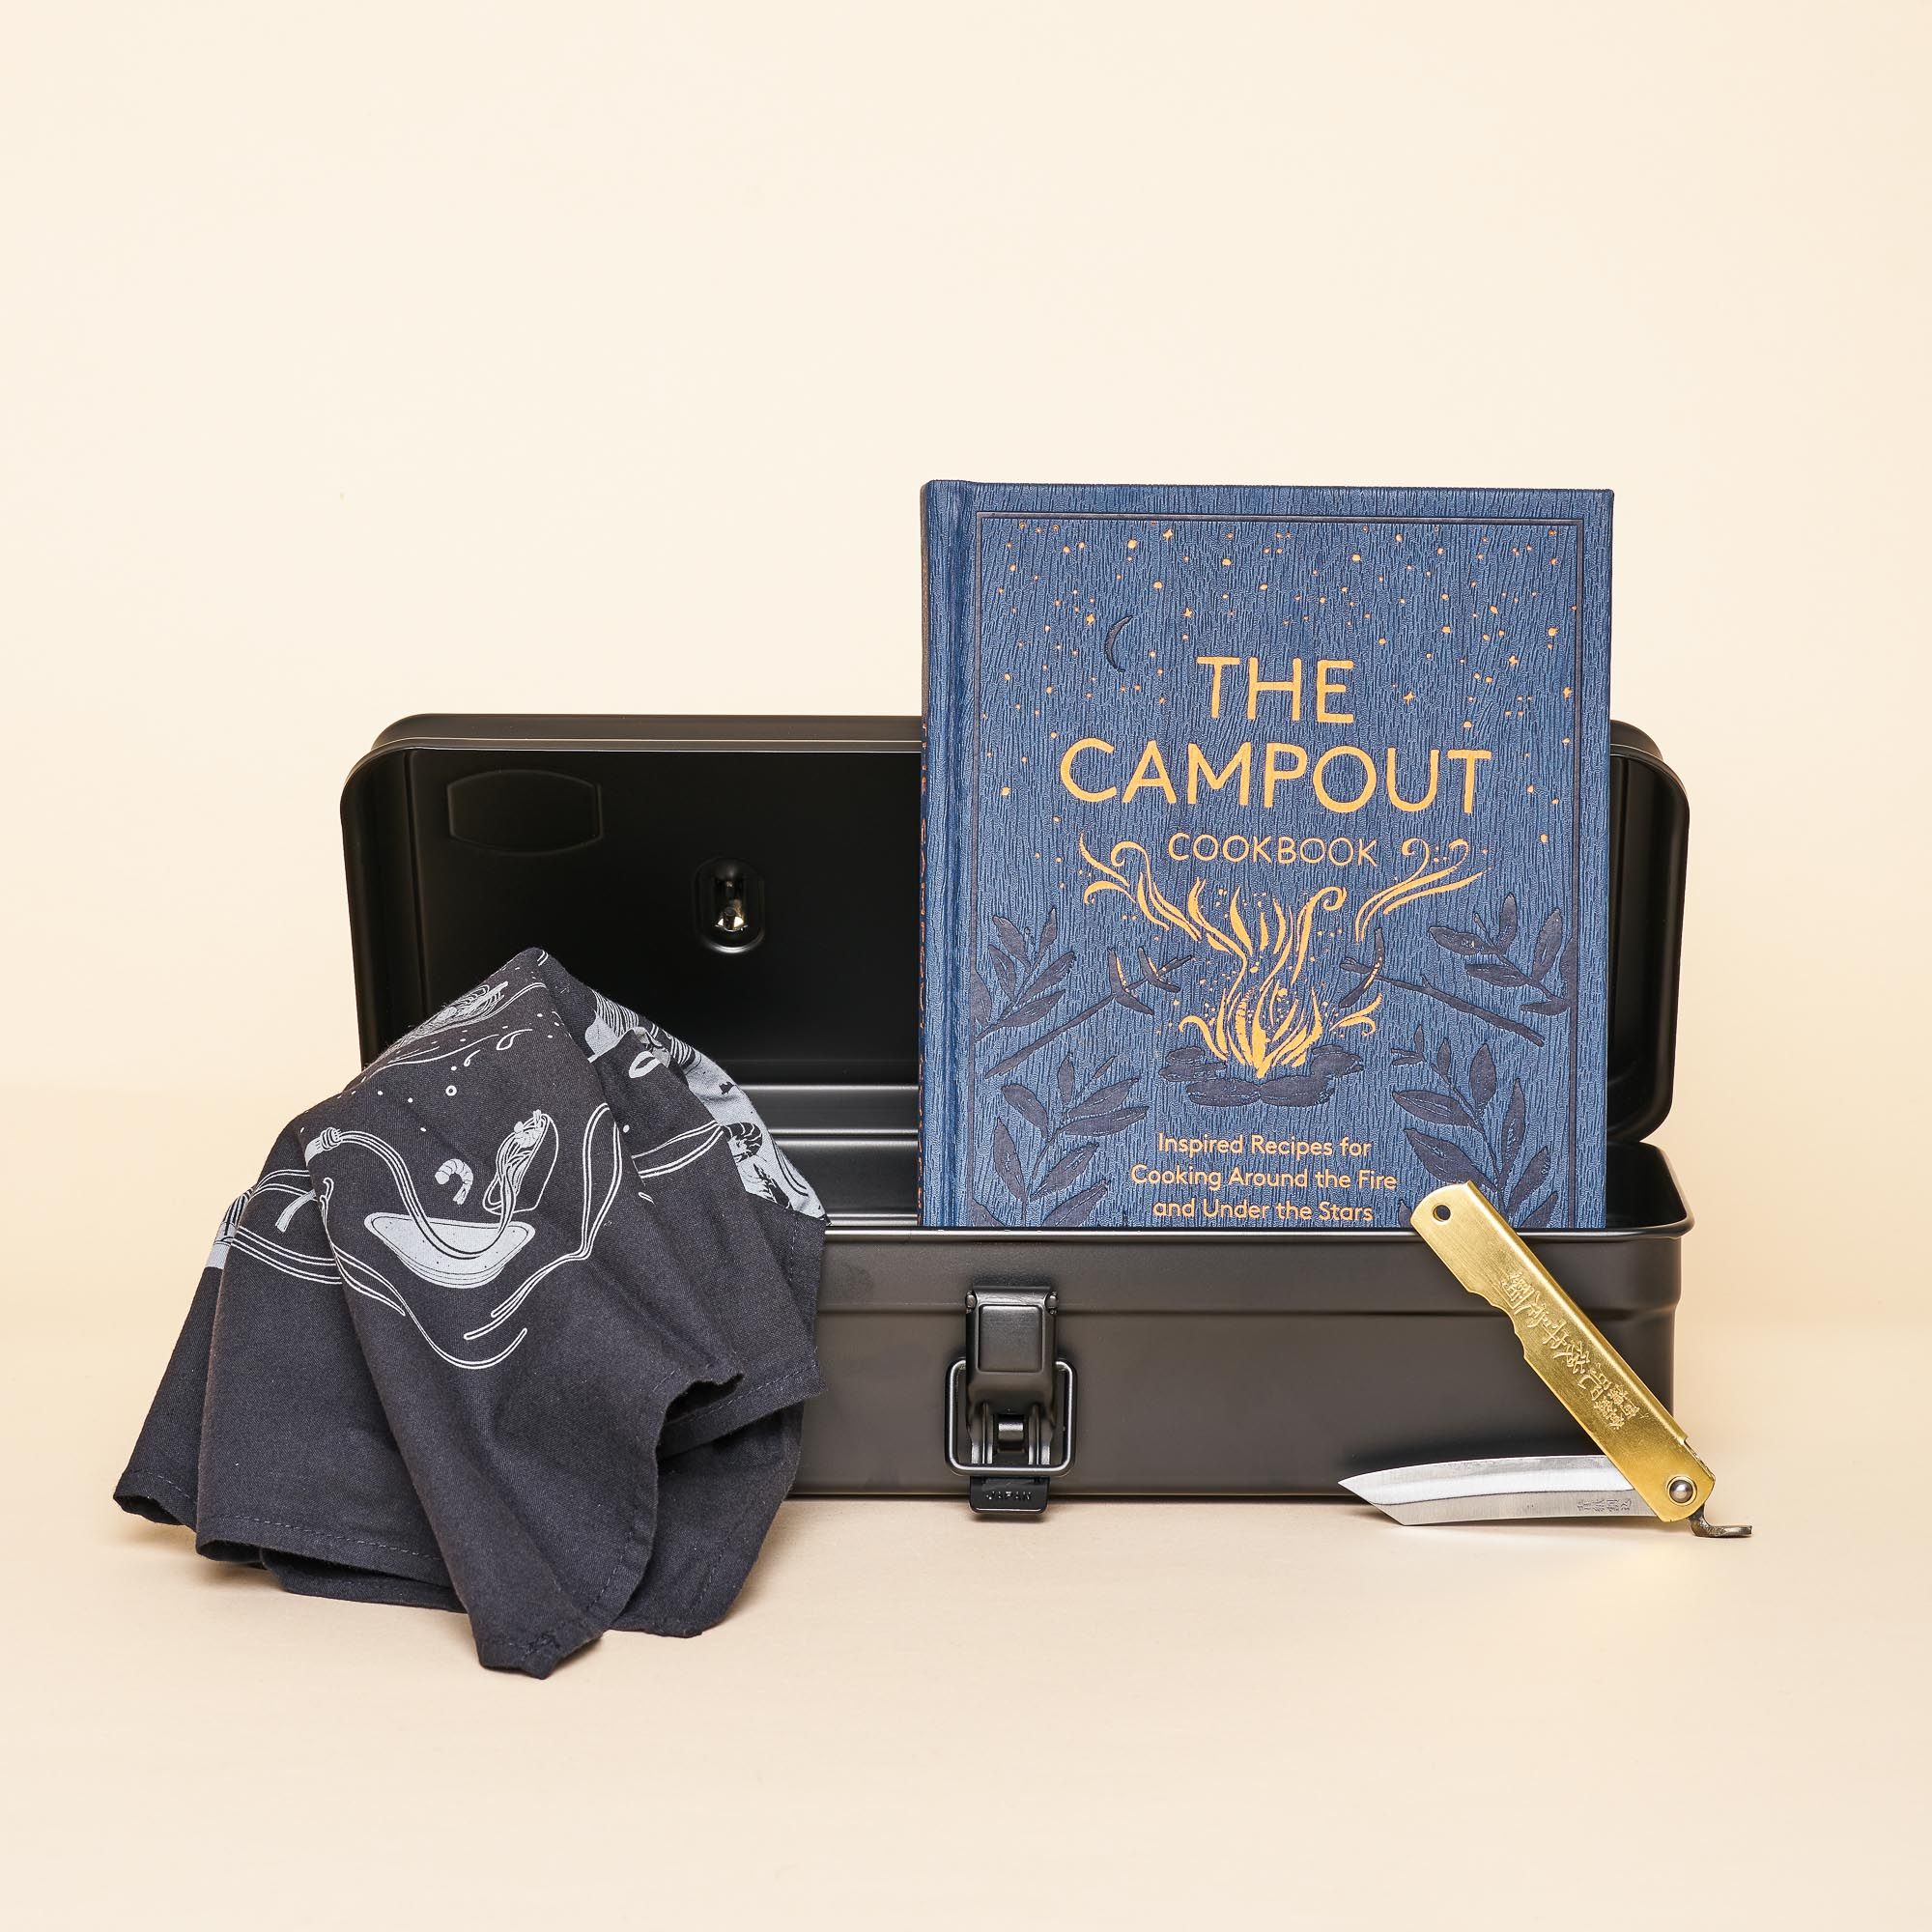 A steel box opens to display a navy blue cookbook ("The Campout Cookbook"). A hand holds a brass handled pocket knife with Japanese inscriptions on the handle. A black and white bandana sits in front of the box.